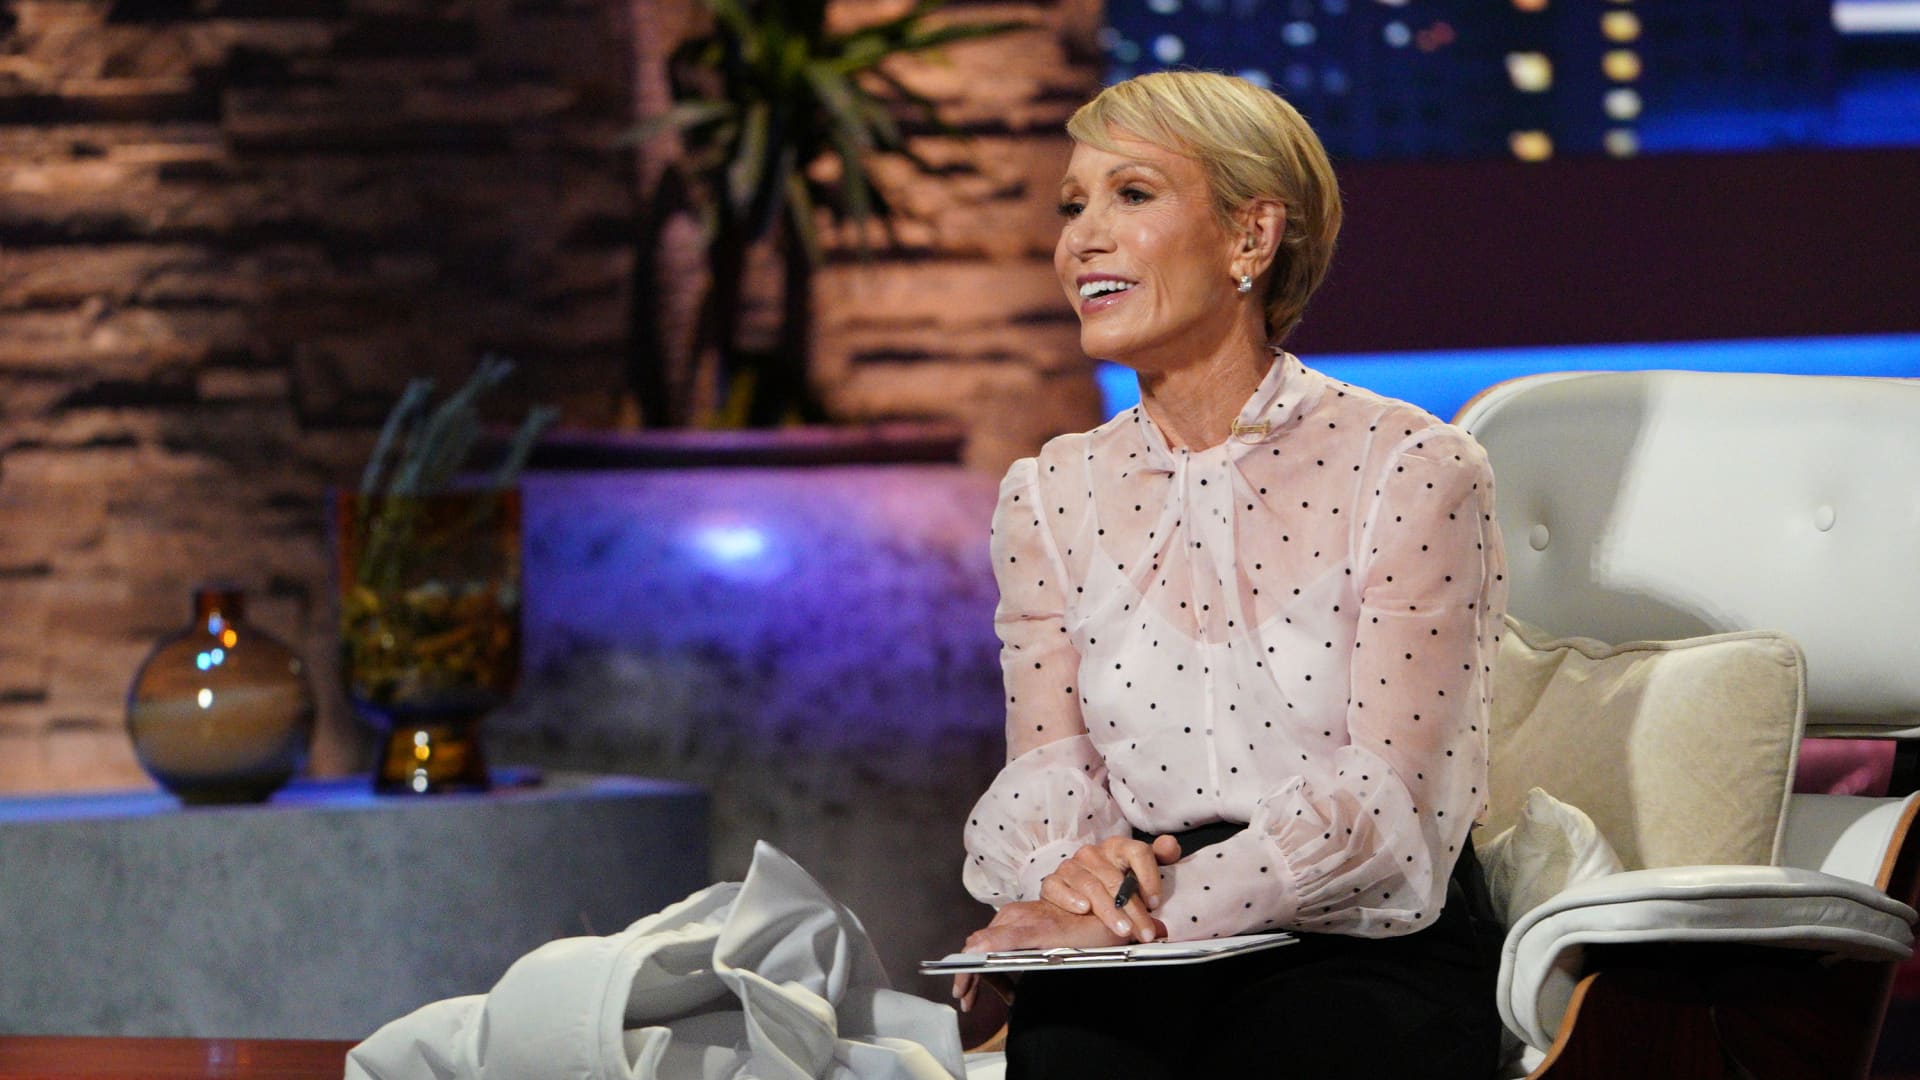 Barbara Corcoran: You don't need to 'work your buns off to get rich'—here’s what to do instead